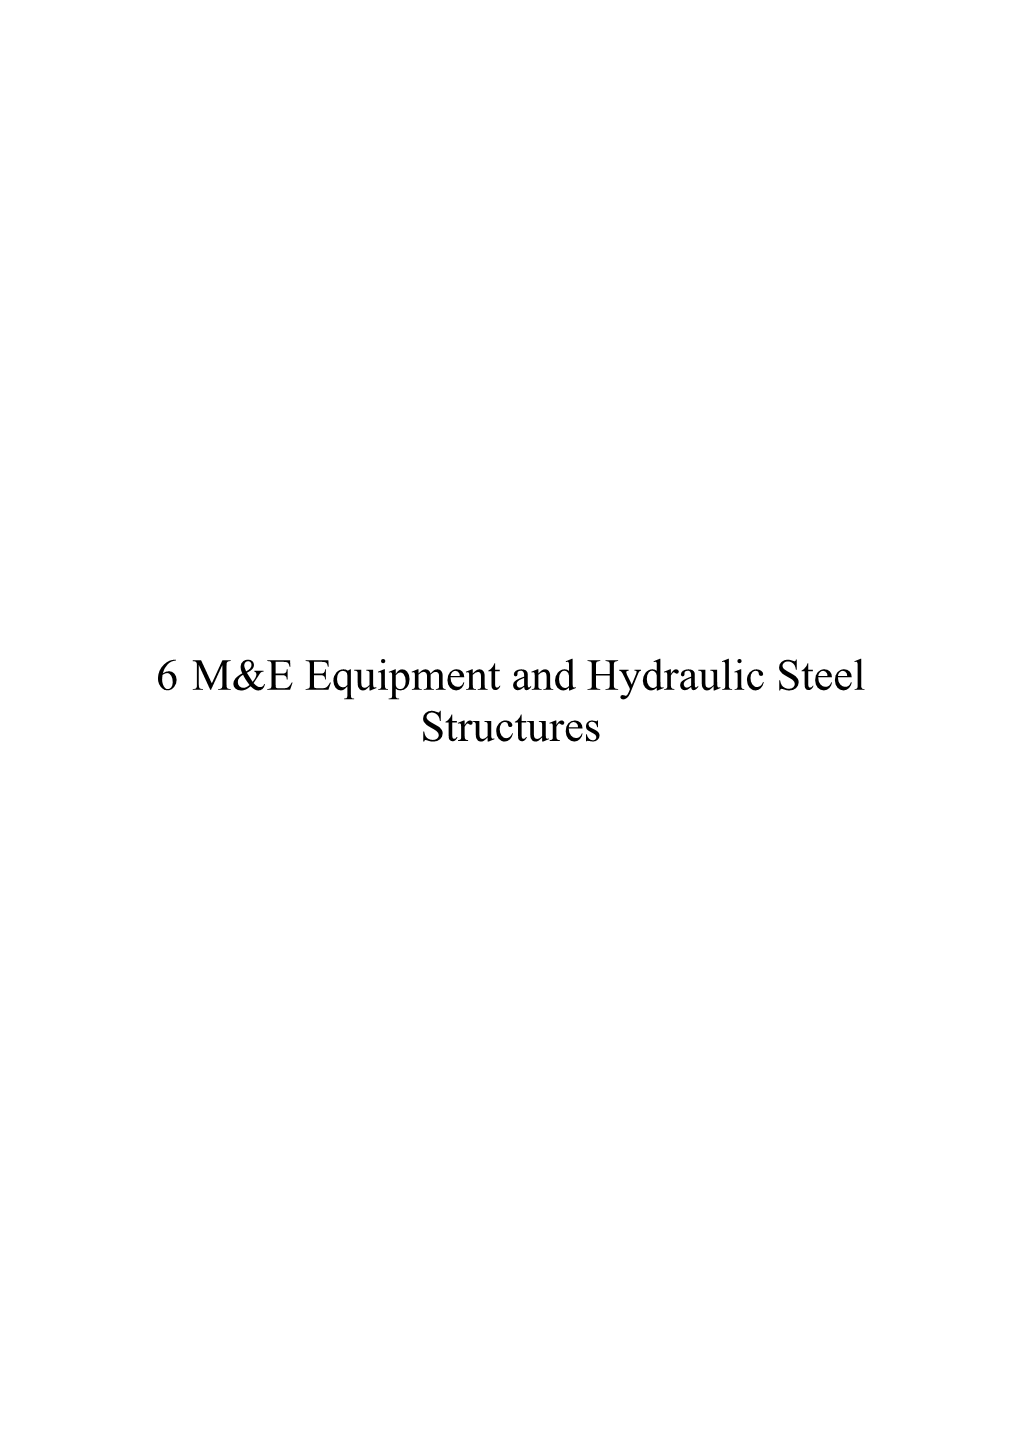 6 M&E Equipment and Hydraulic Steel Structures